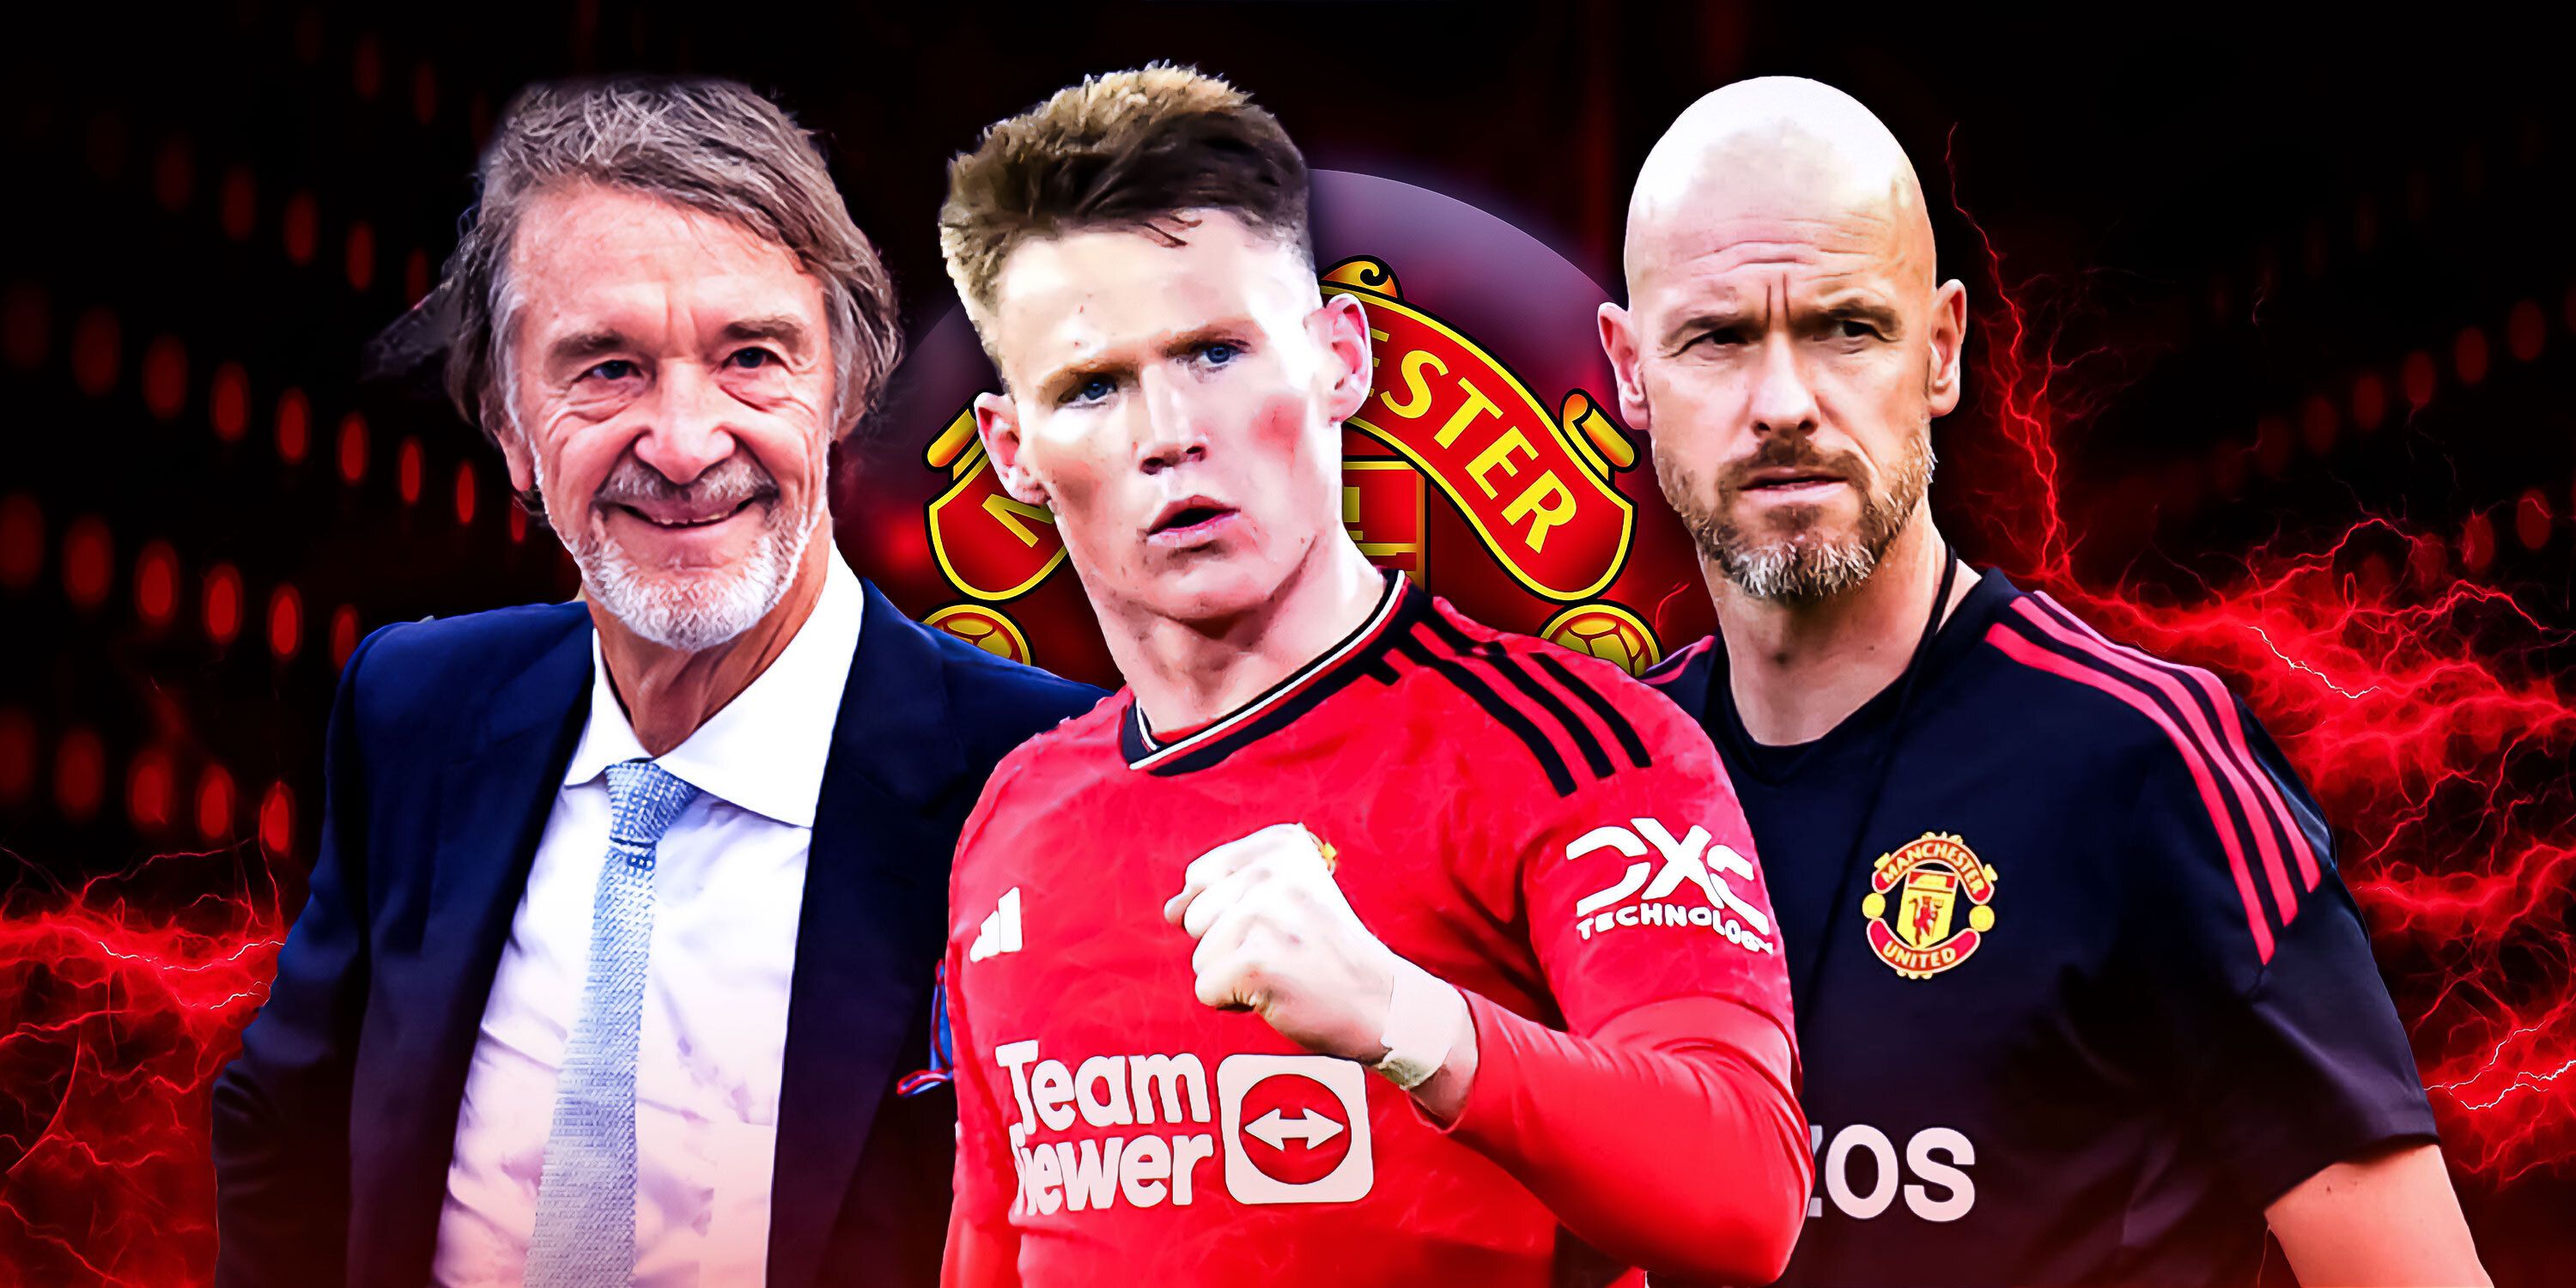 Manchester United co-owner Sir Jim Ratcliffe, manager Erik ten Hag, and midfielder Scott McTominay